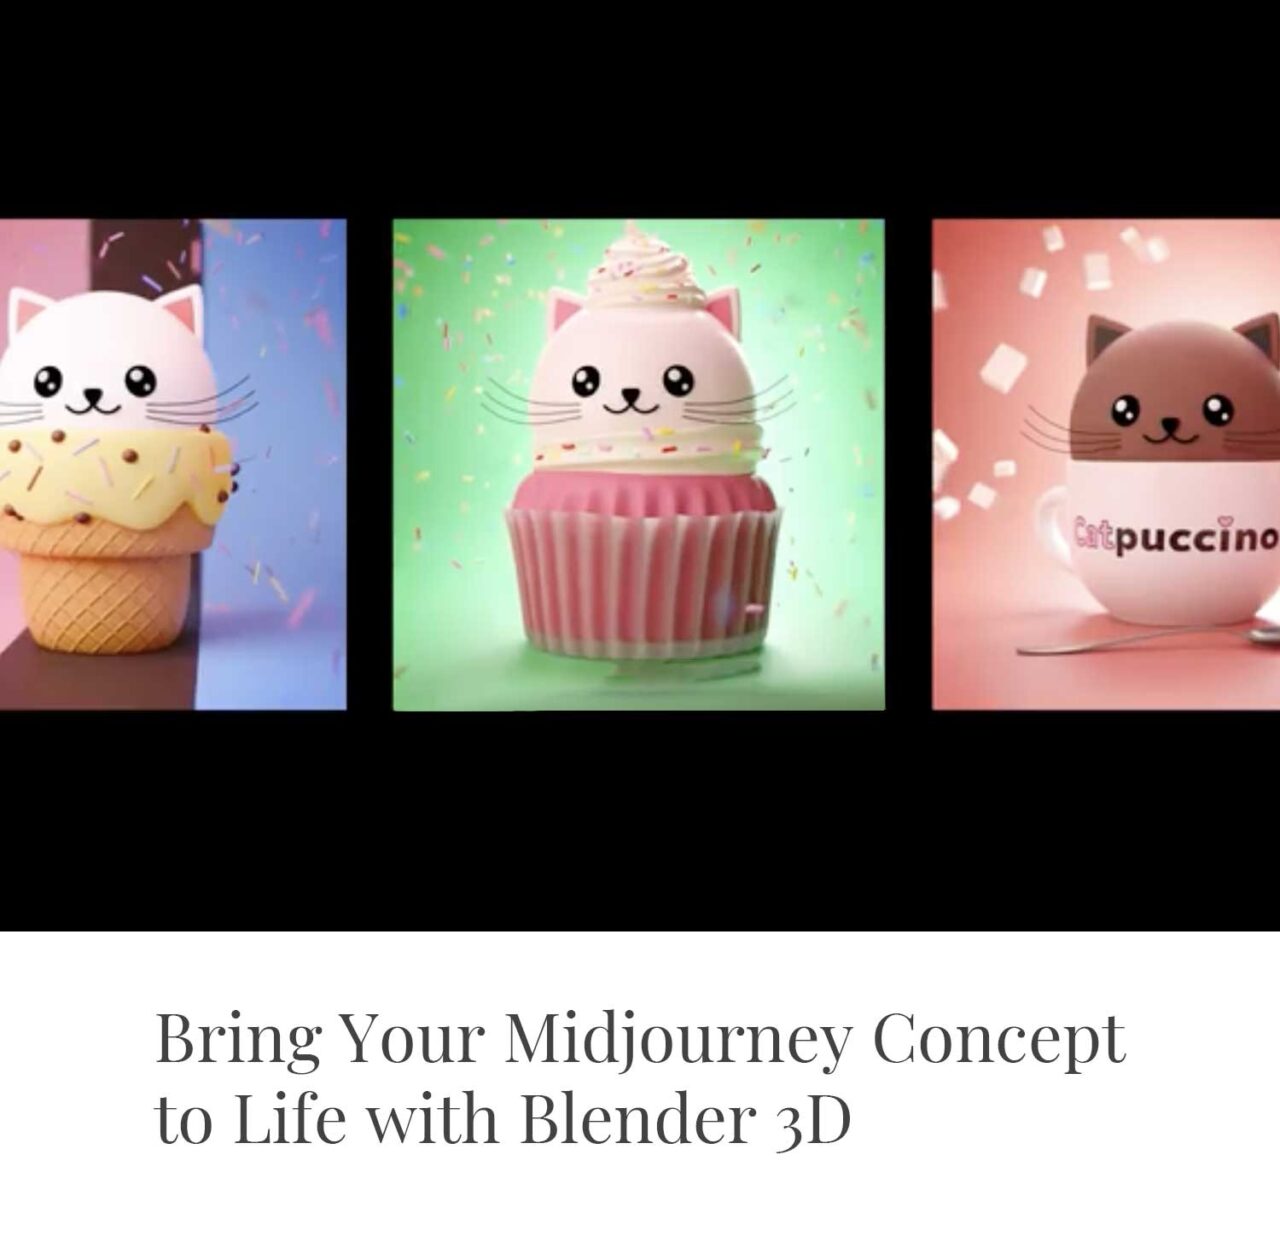 Bring Your Midjourney Concept to Life With Blender